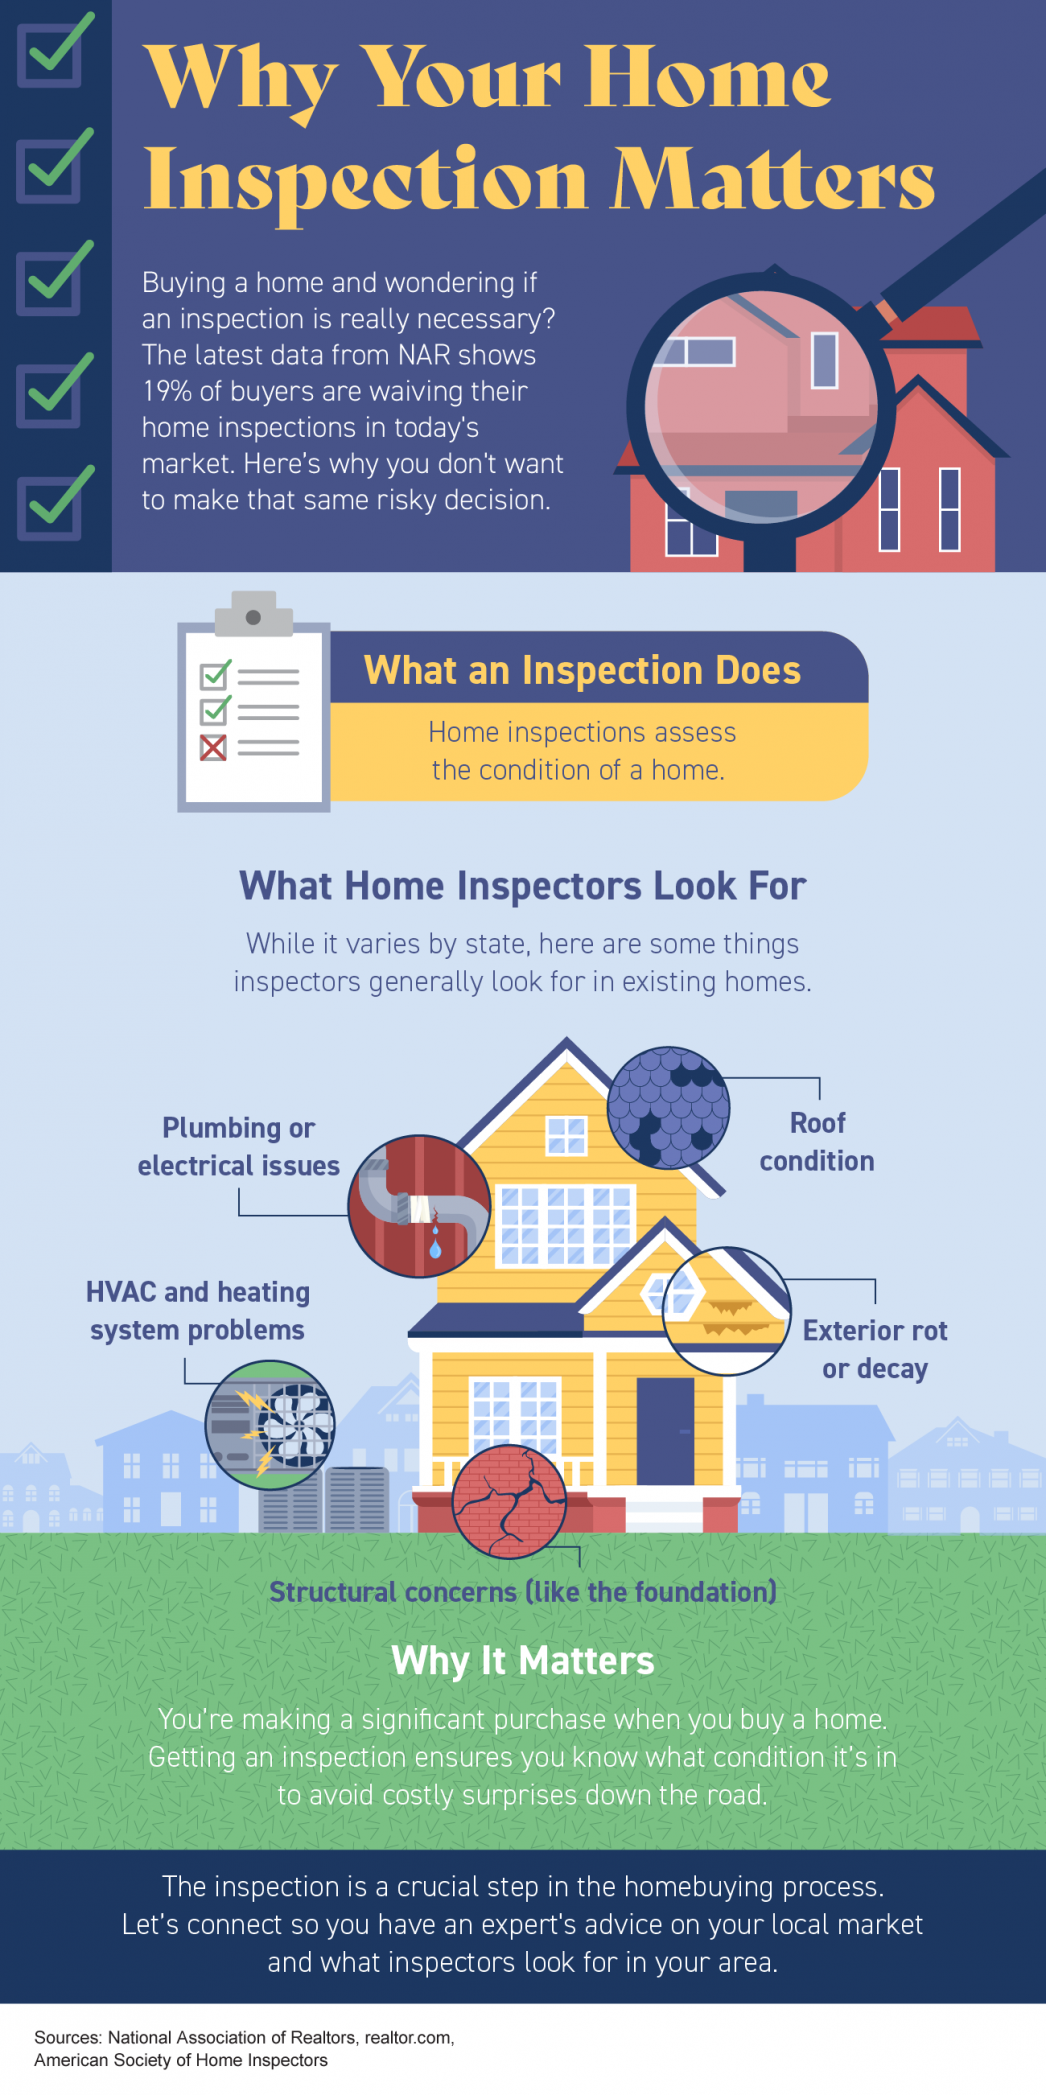 Why Your Home Inspection Matters